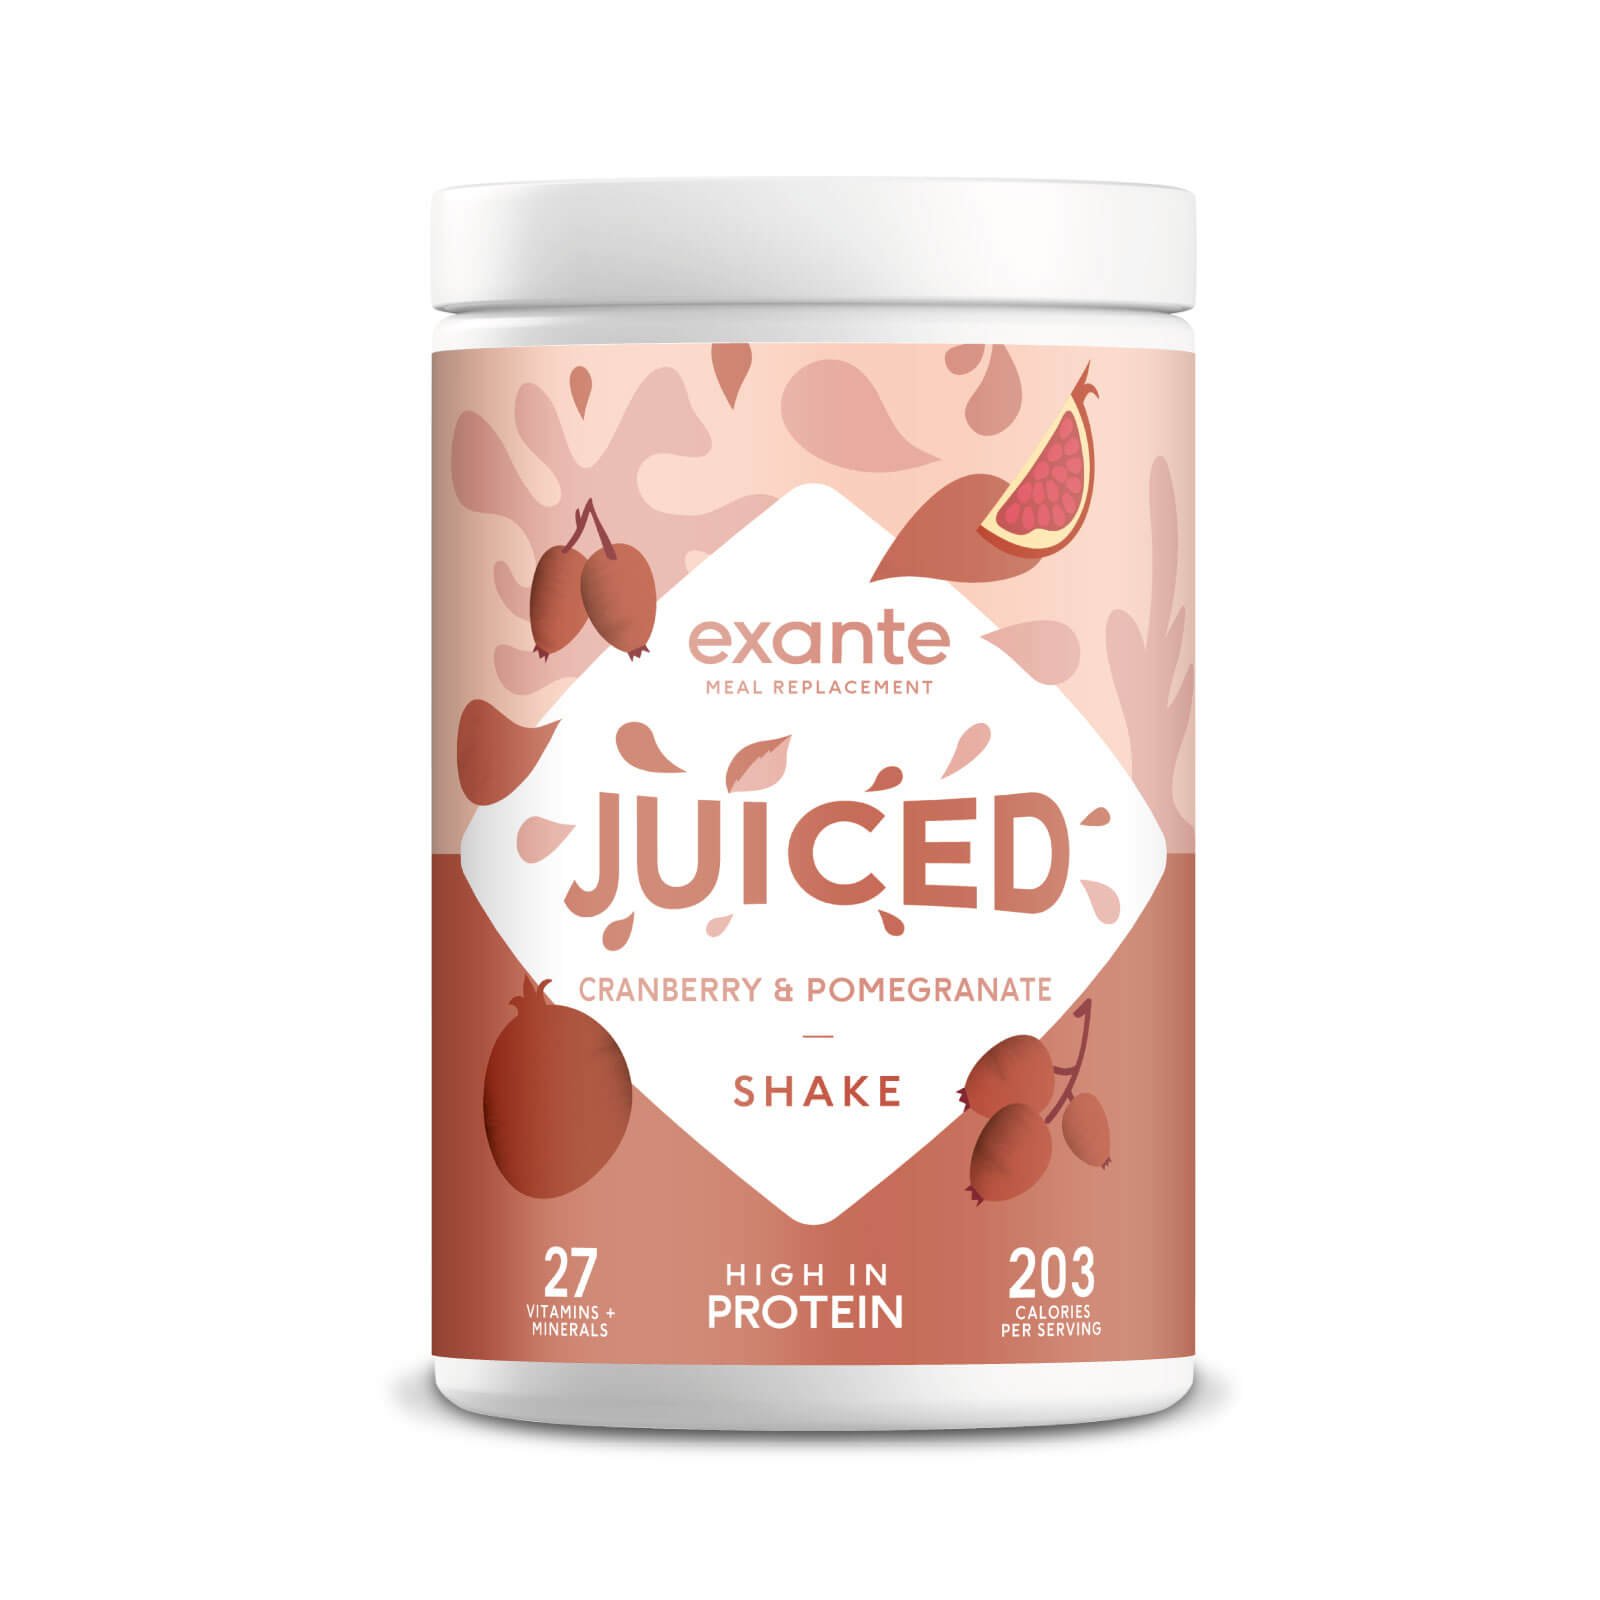 JUICED Meal Replacement Shake (10 Servings) - 10servings - Cranberry Pomegranate